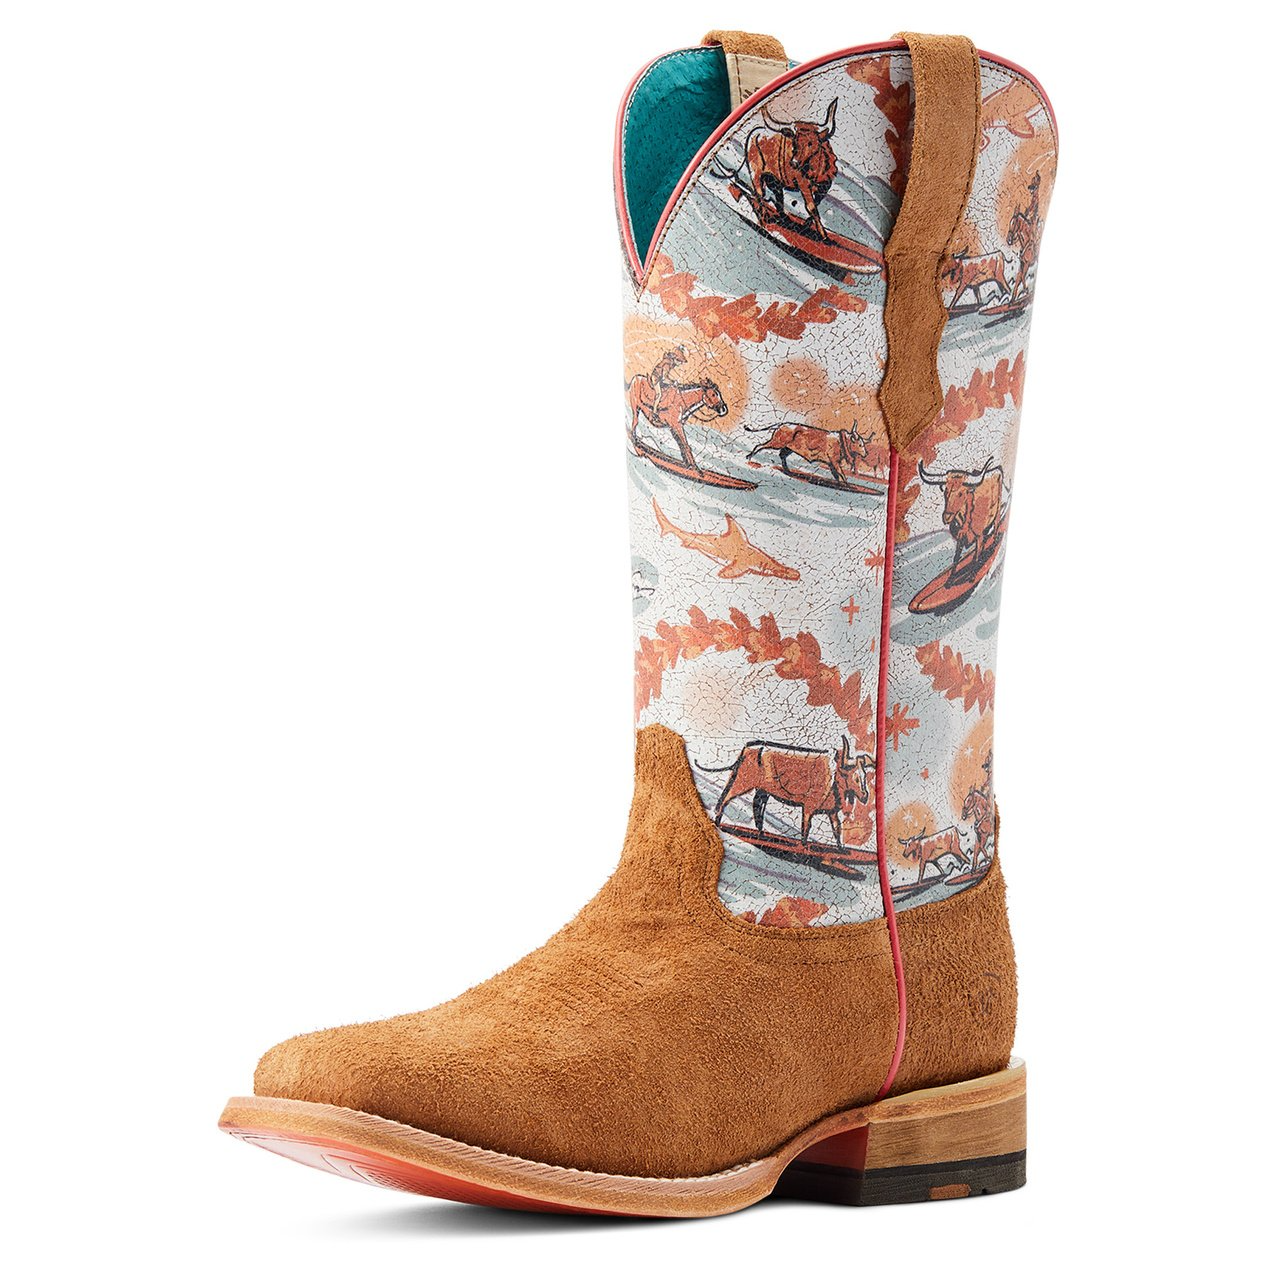 **Ariat Women's Frontier Western Aloha Boots - Rusty Roughout